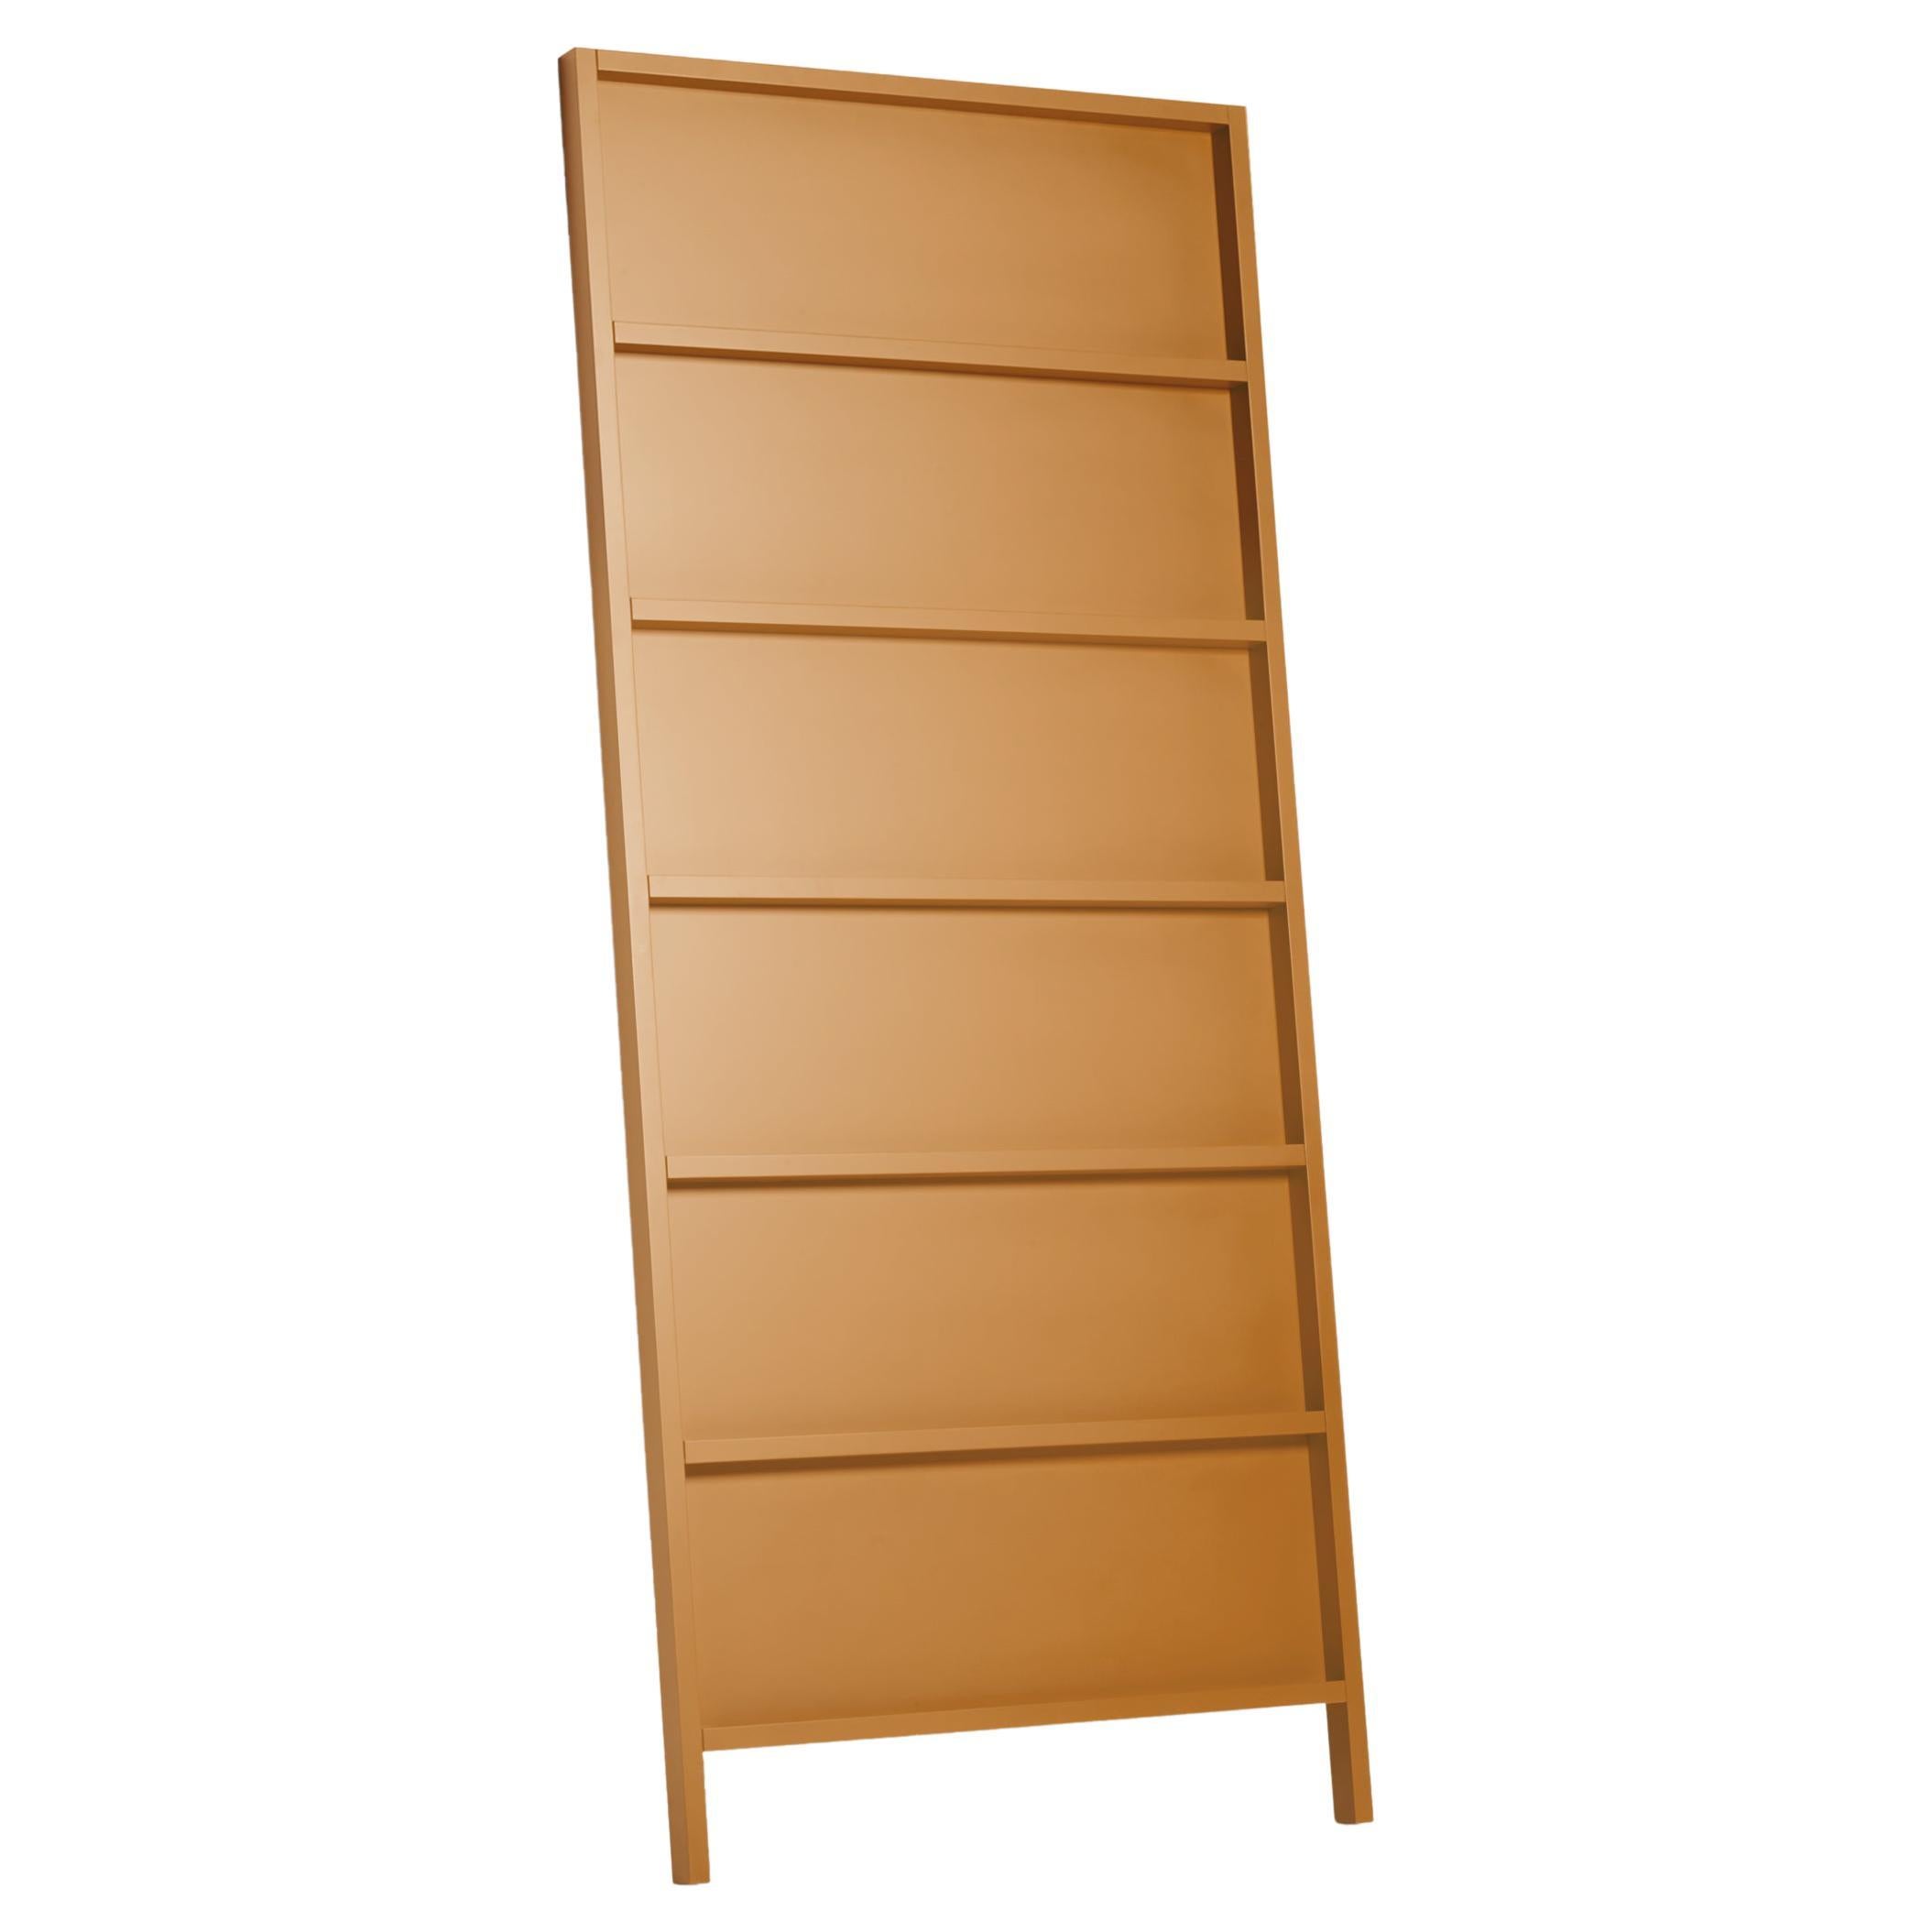 Moooi Oblique Big Cupboard / Wall Shelf in Ochre Brown Lacquered Beech For Sale